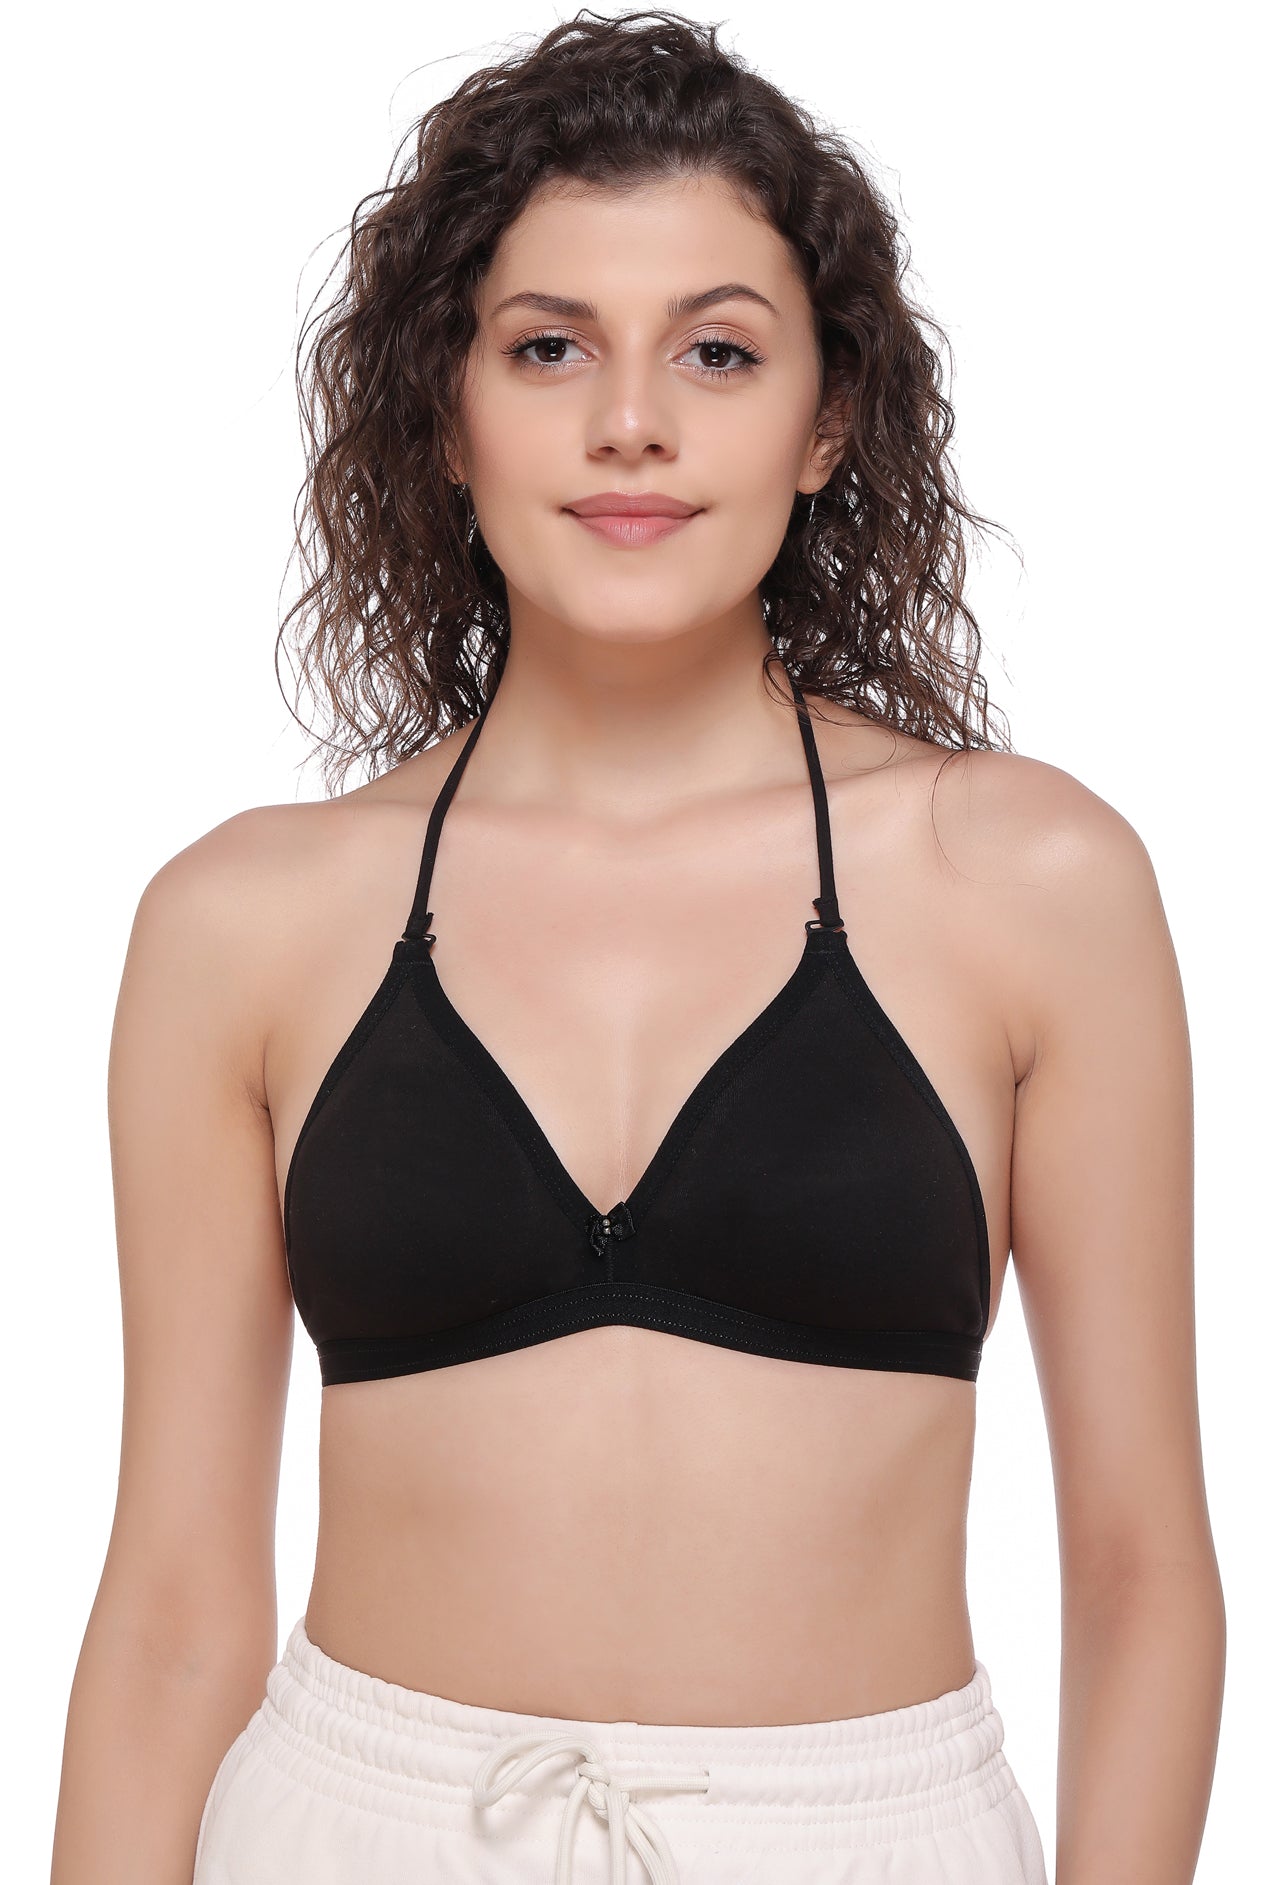 Deep Neck bra – Online Shopping site in India